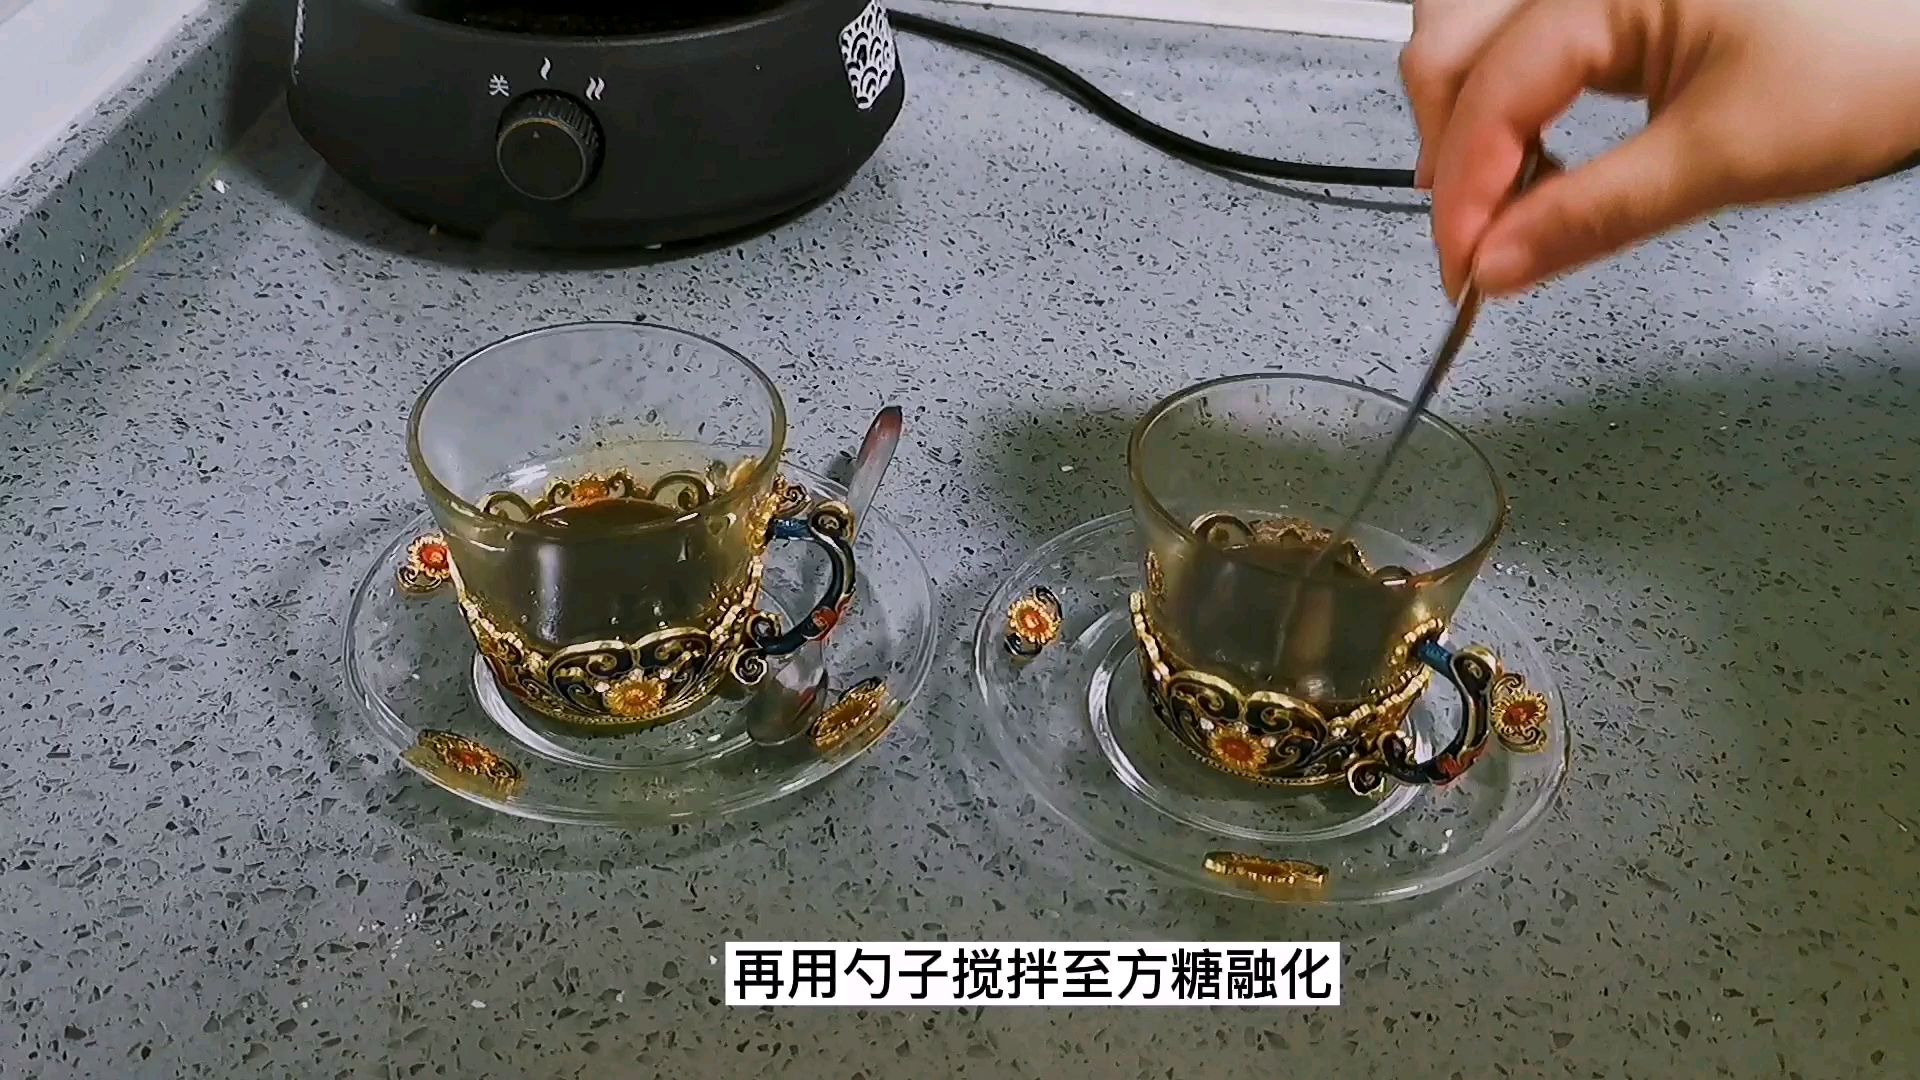 Energetic Afternoon Tea: A Cup of Hot Milk Coffee is Enough recipe